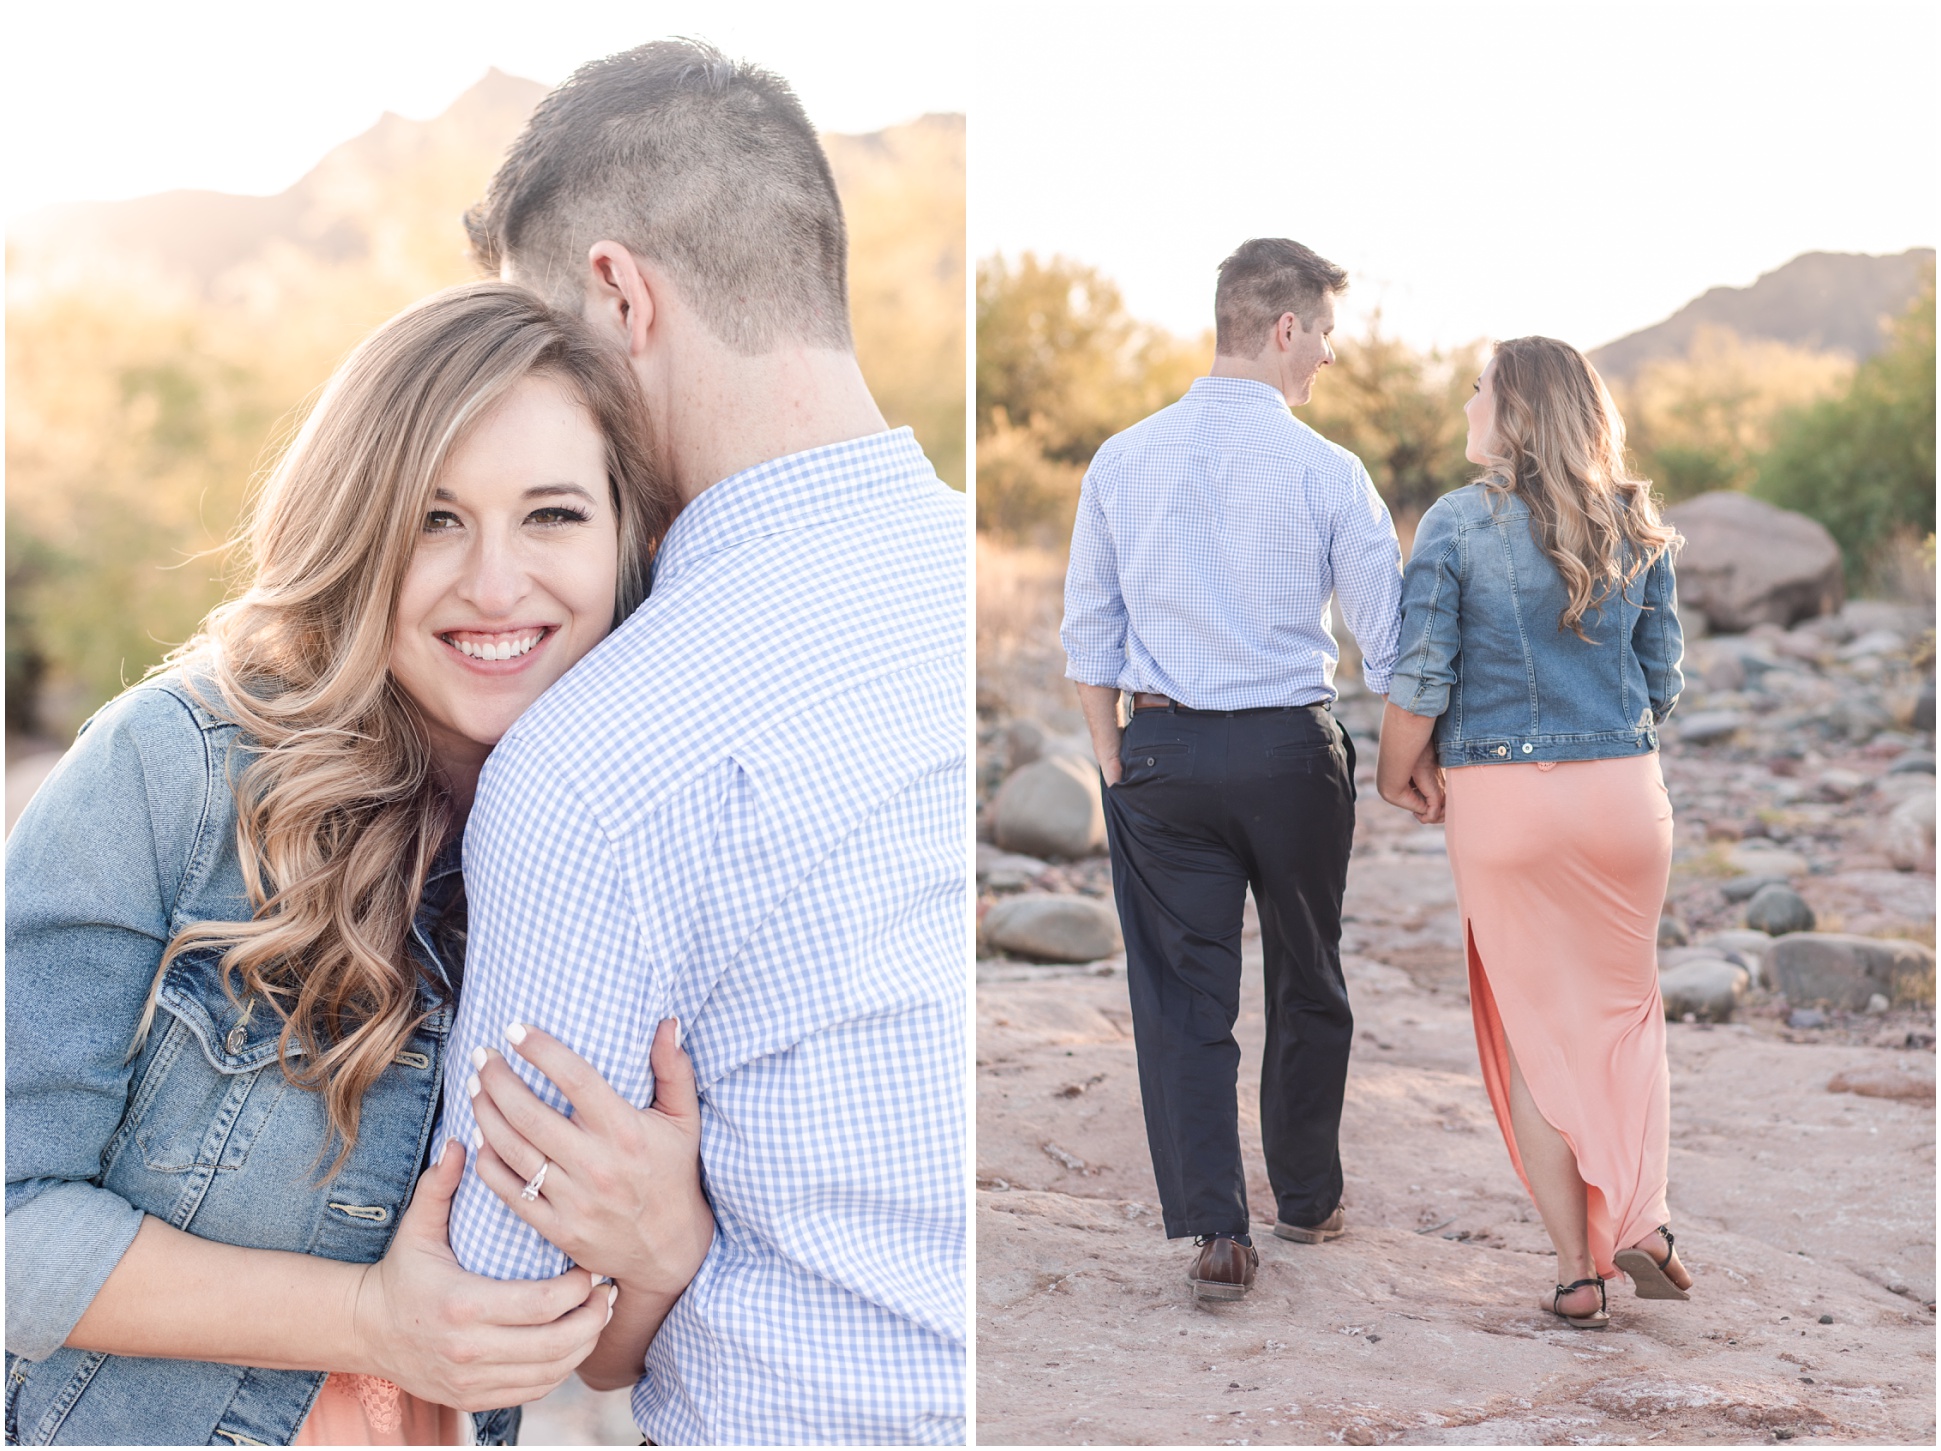 man looking away from camera while woman cuddles his arm and smiles at camera; couple walking away from the camera towards sunset